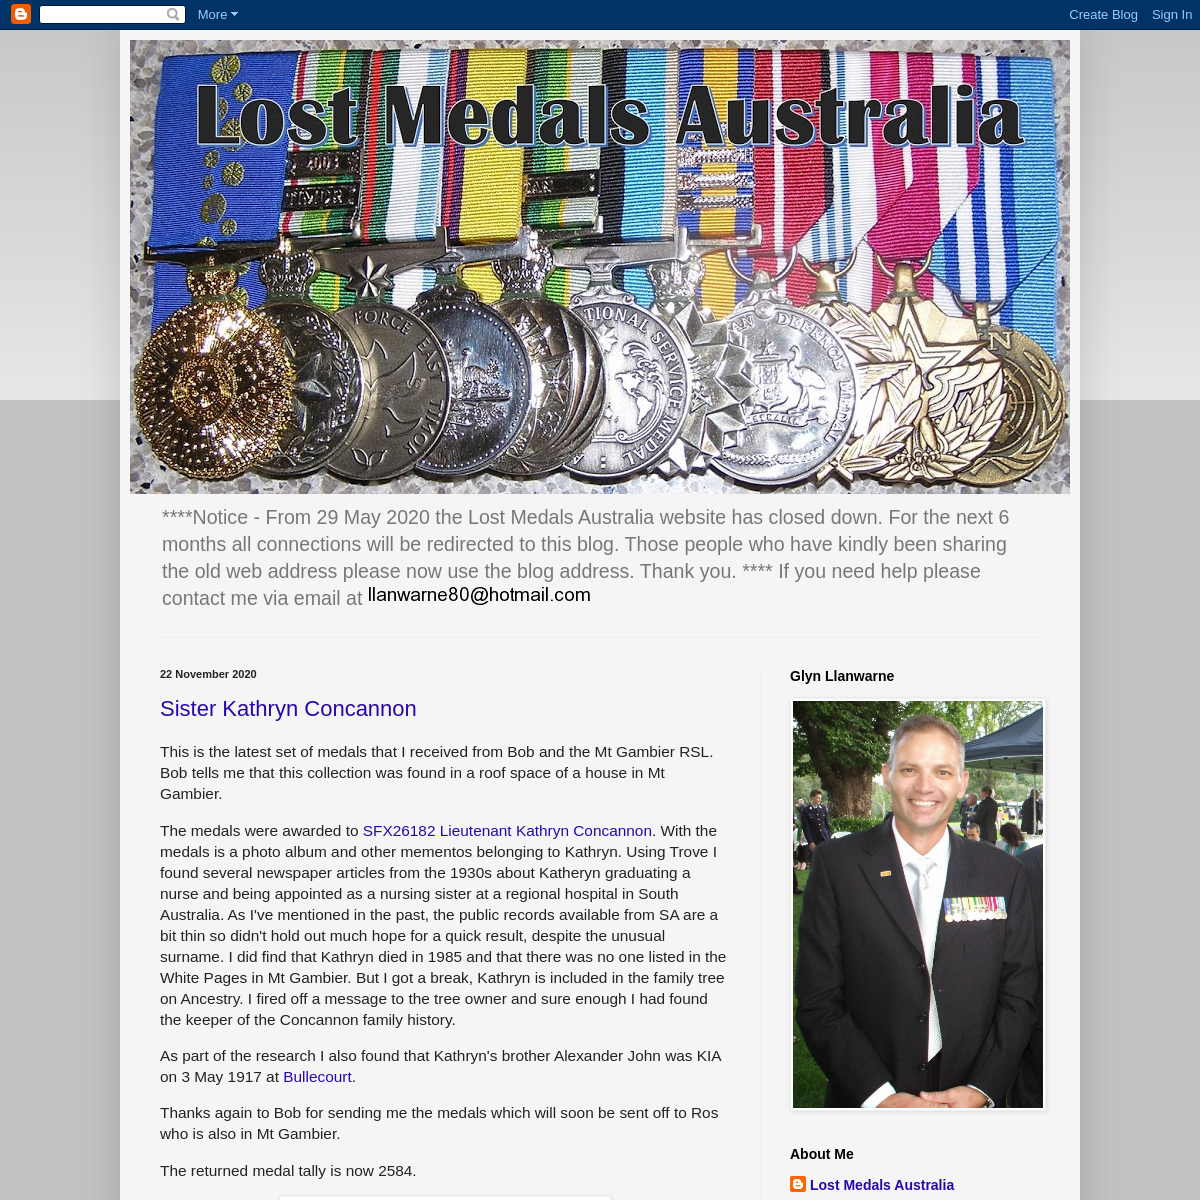 A complete backup of lostmedalsaustralia.com